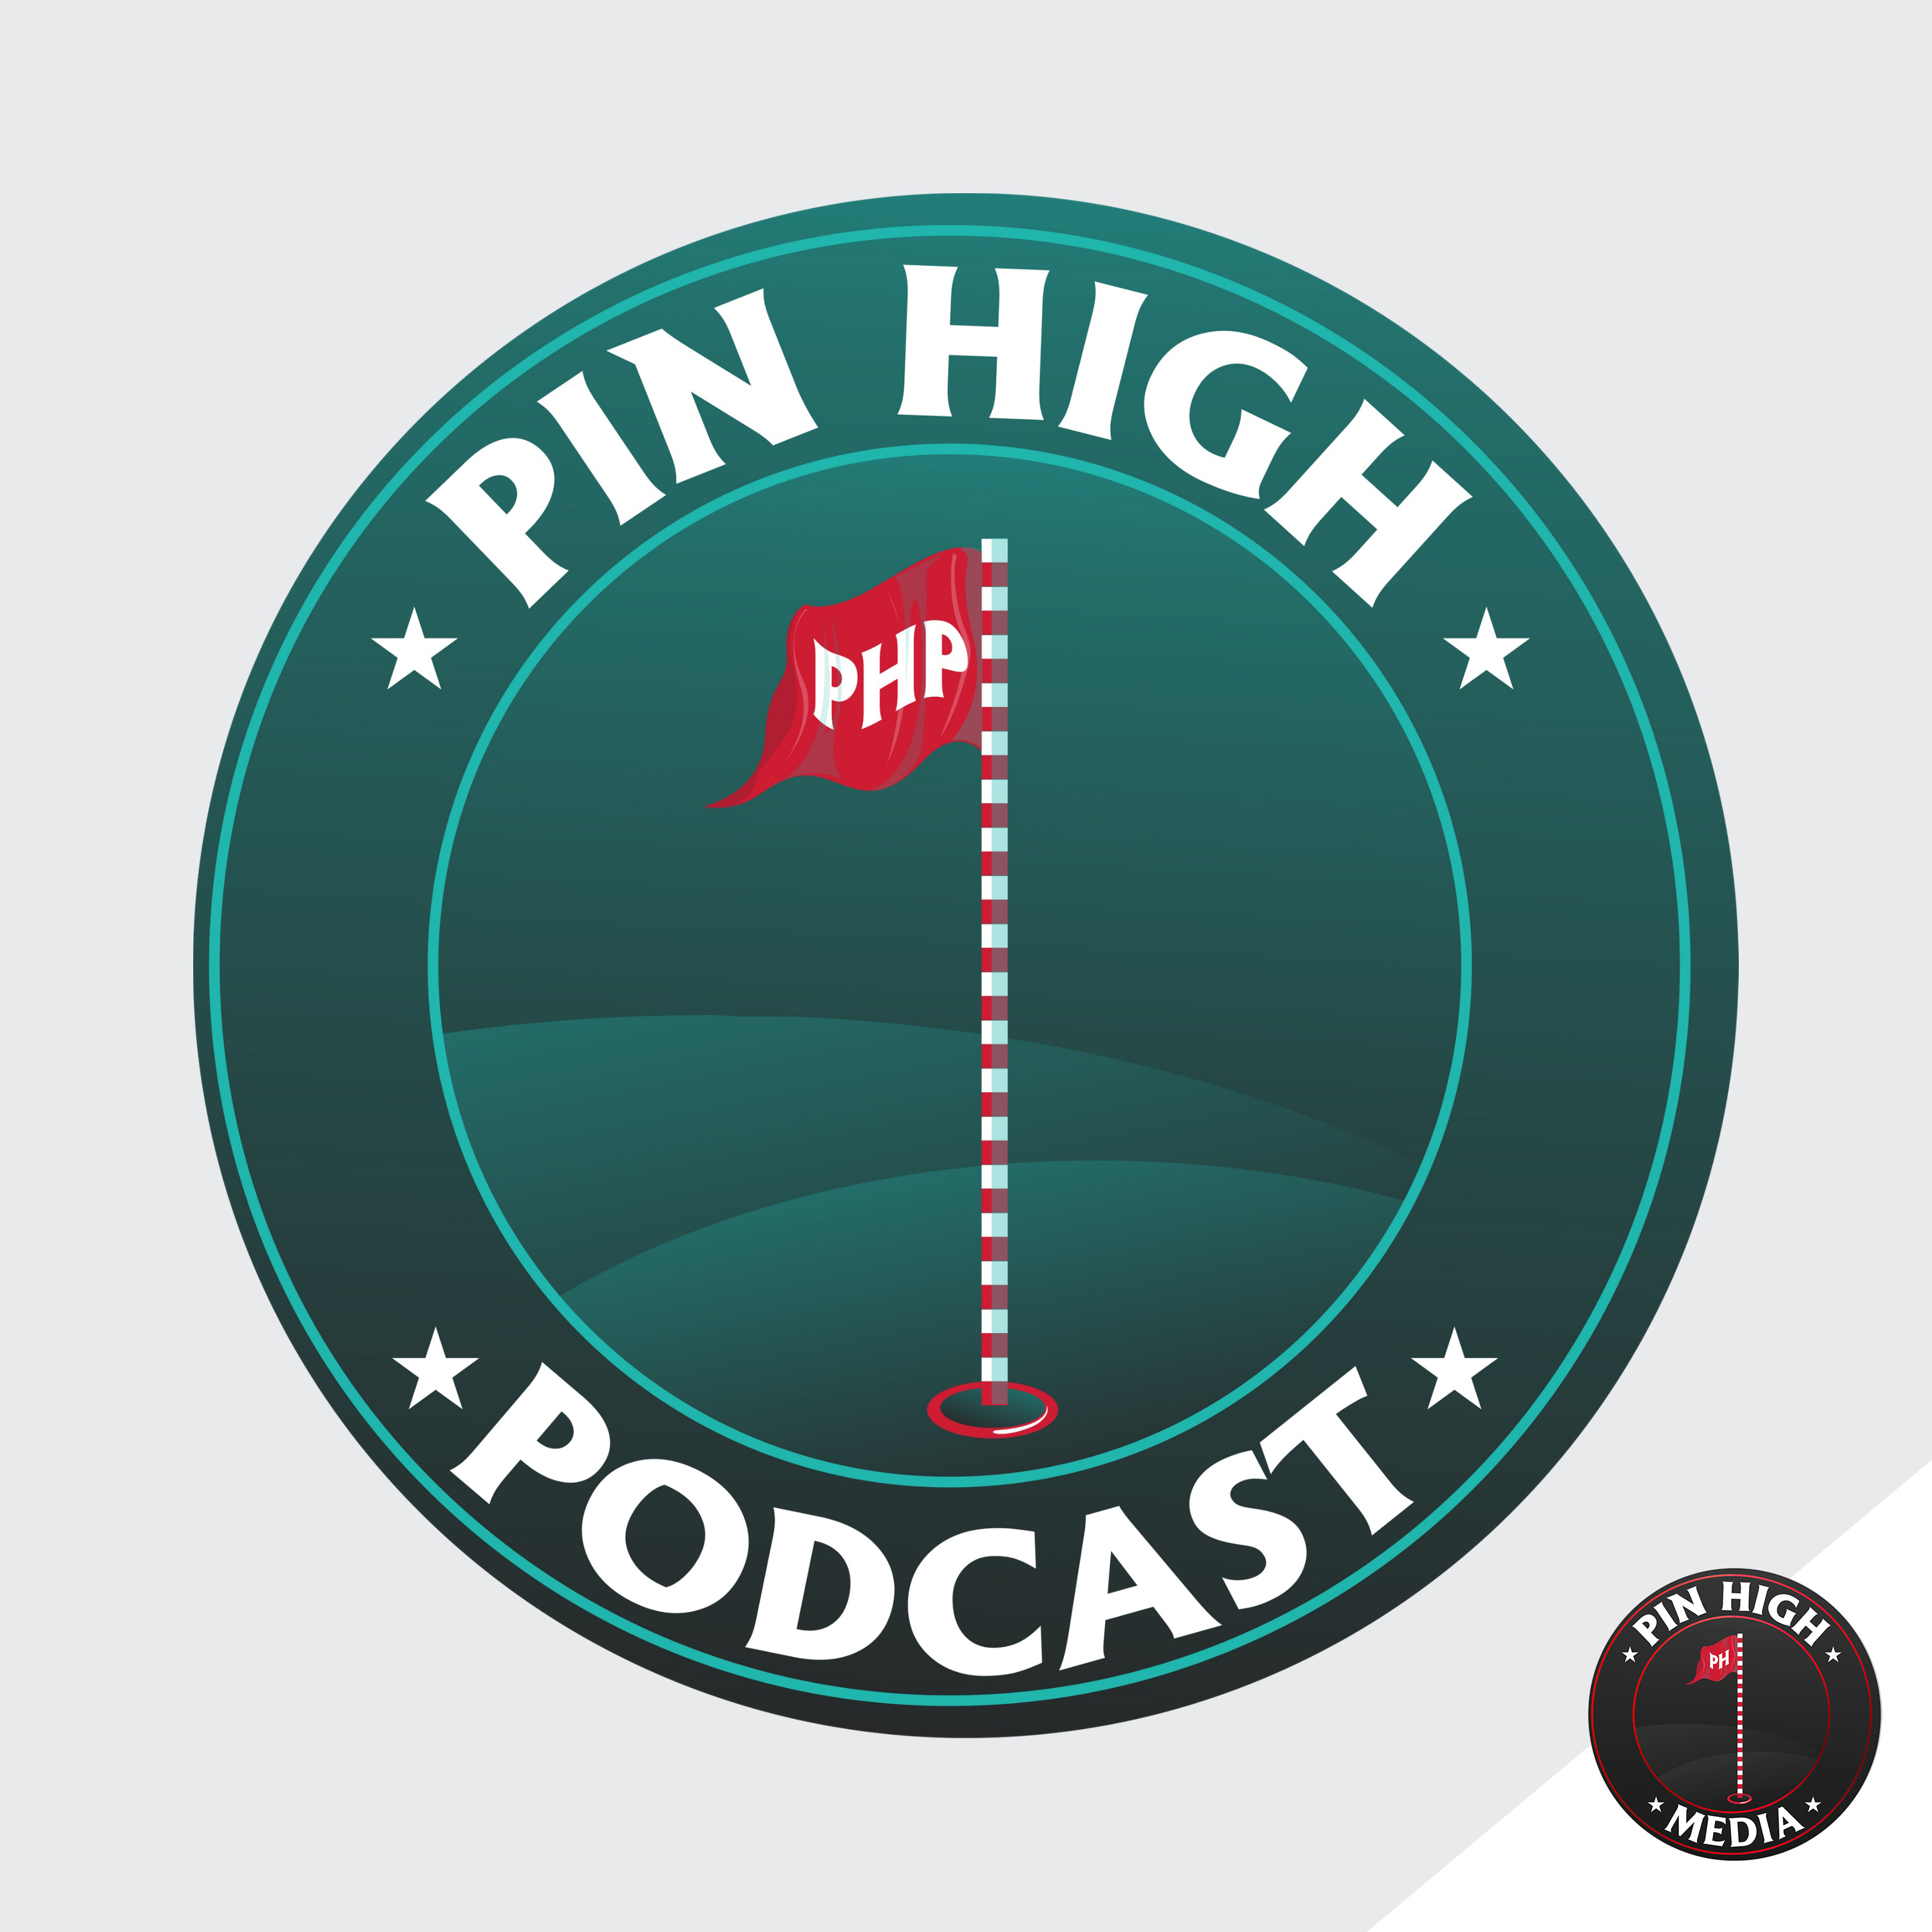 Pin High Podcast Ep. 117: We’re Going to the PGA Show!